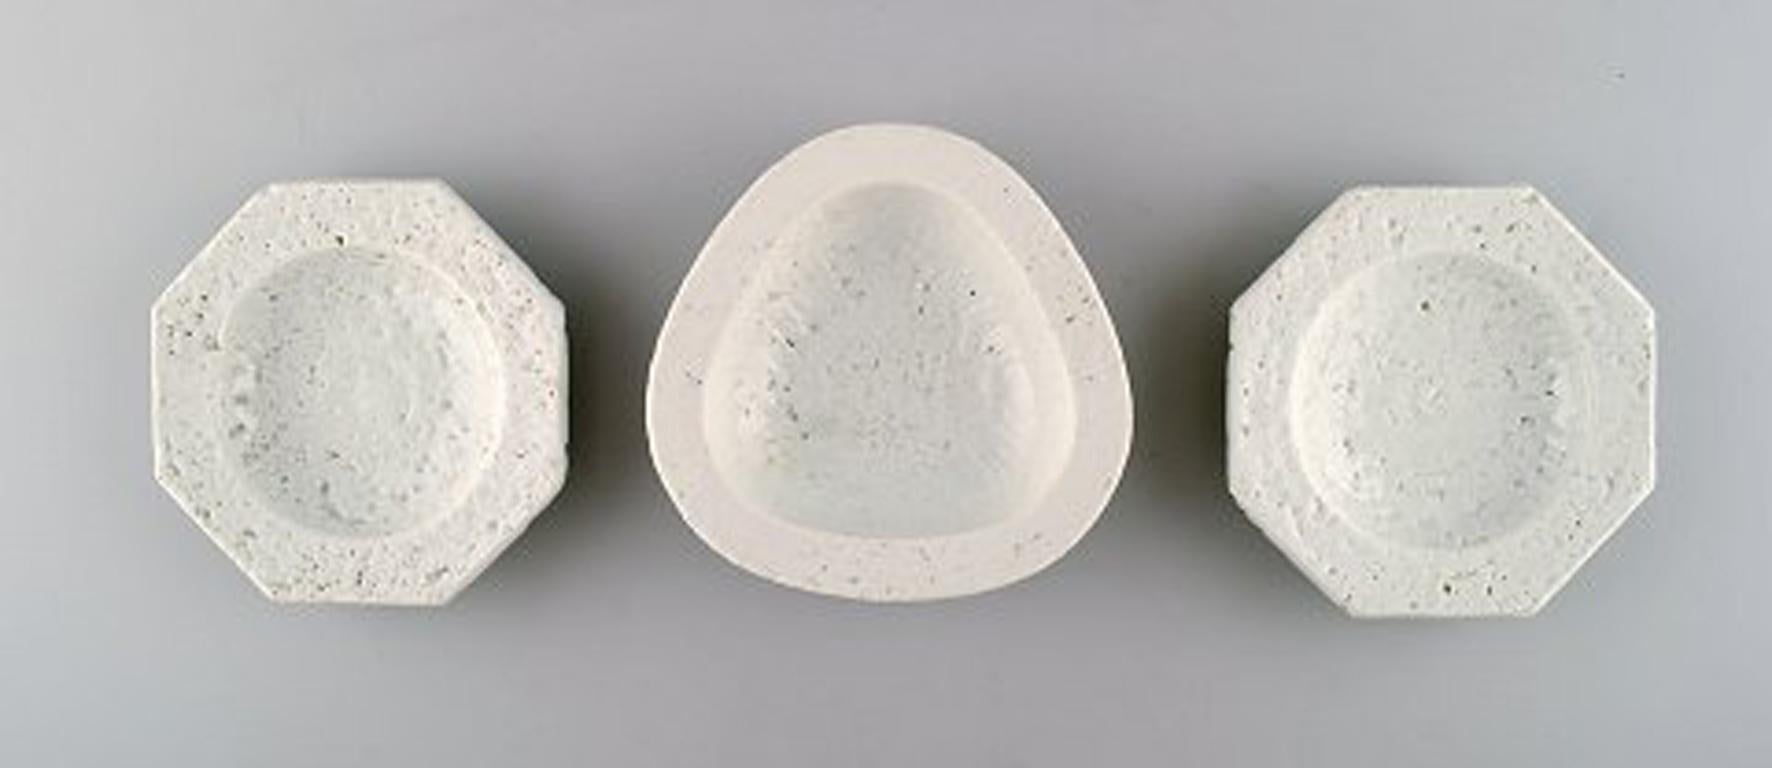 Rörstrand Gunnar Nylund 3 small Chamotte bowls.
Measures 15 cm. x 4 cm. (Largest)
White glaze.
Marked.
In perfect condition.